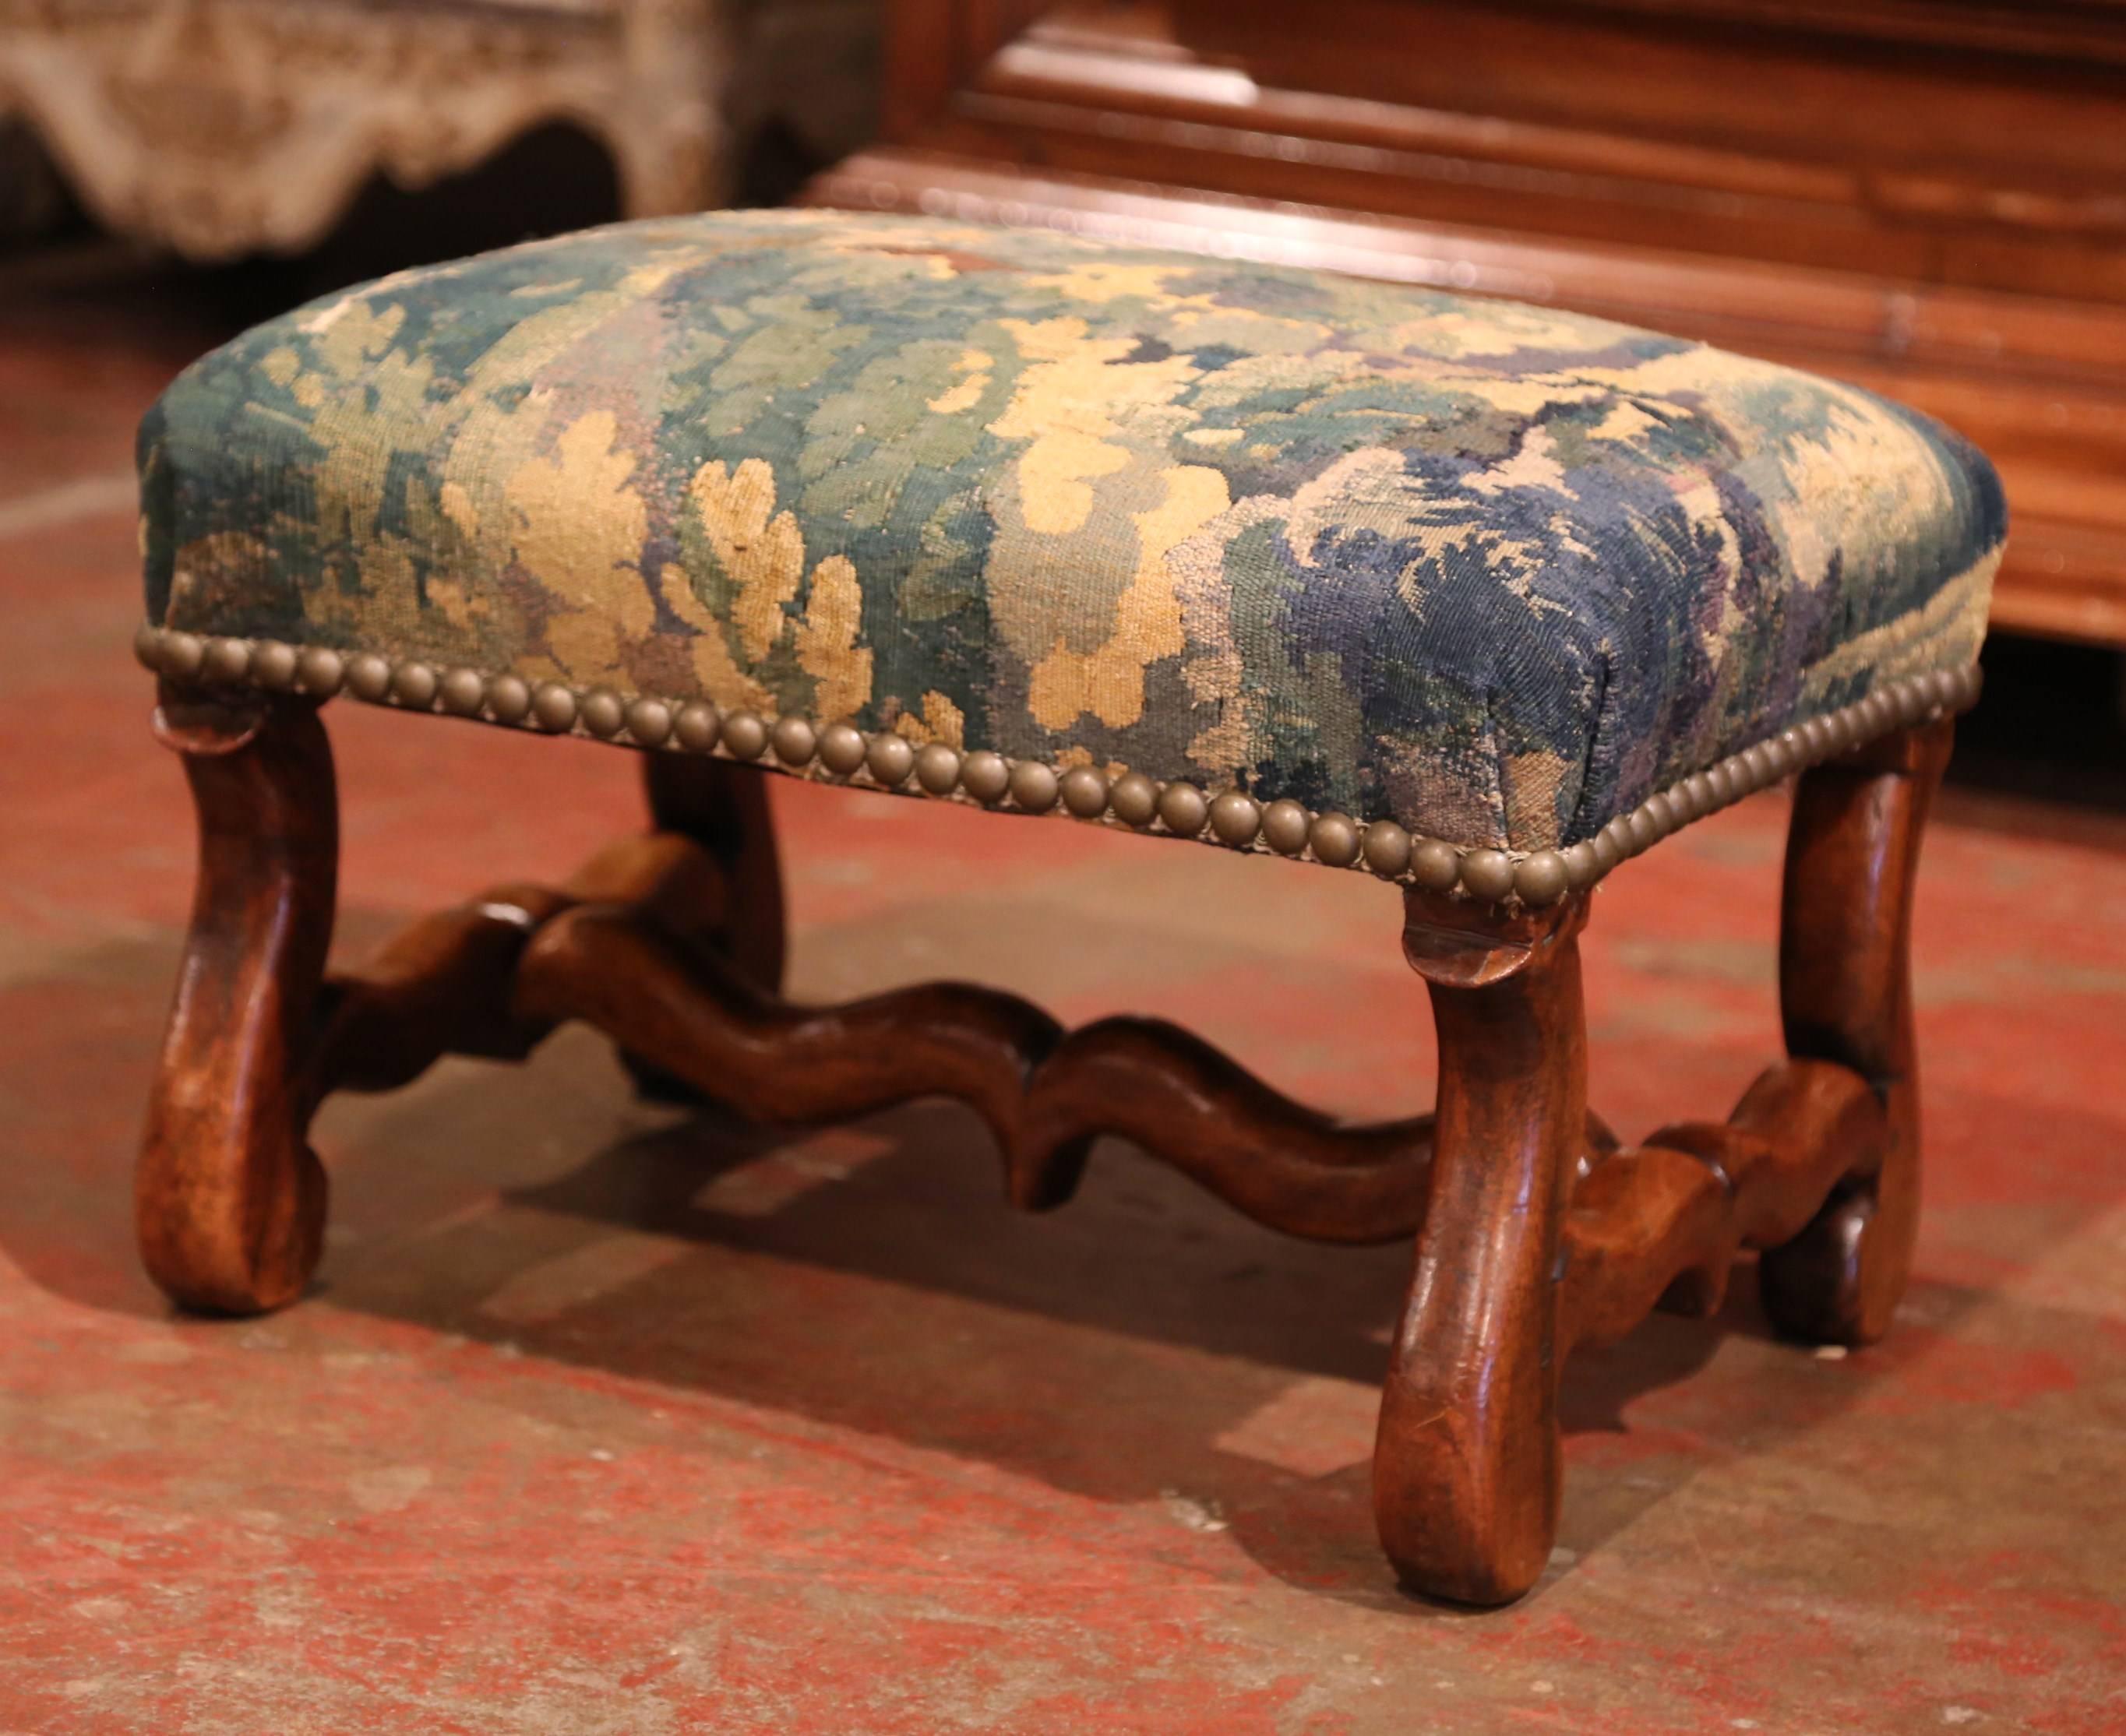 This elegant, antique footstool was crafted in Lyon, France, circa 1860. The large carved, rectangular footrest has been reupholstered with old Aubusson verdure fragment; the stool is further embellished with decorative nail heads and the tapestry